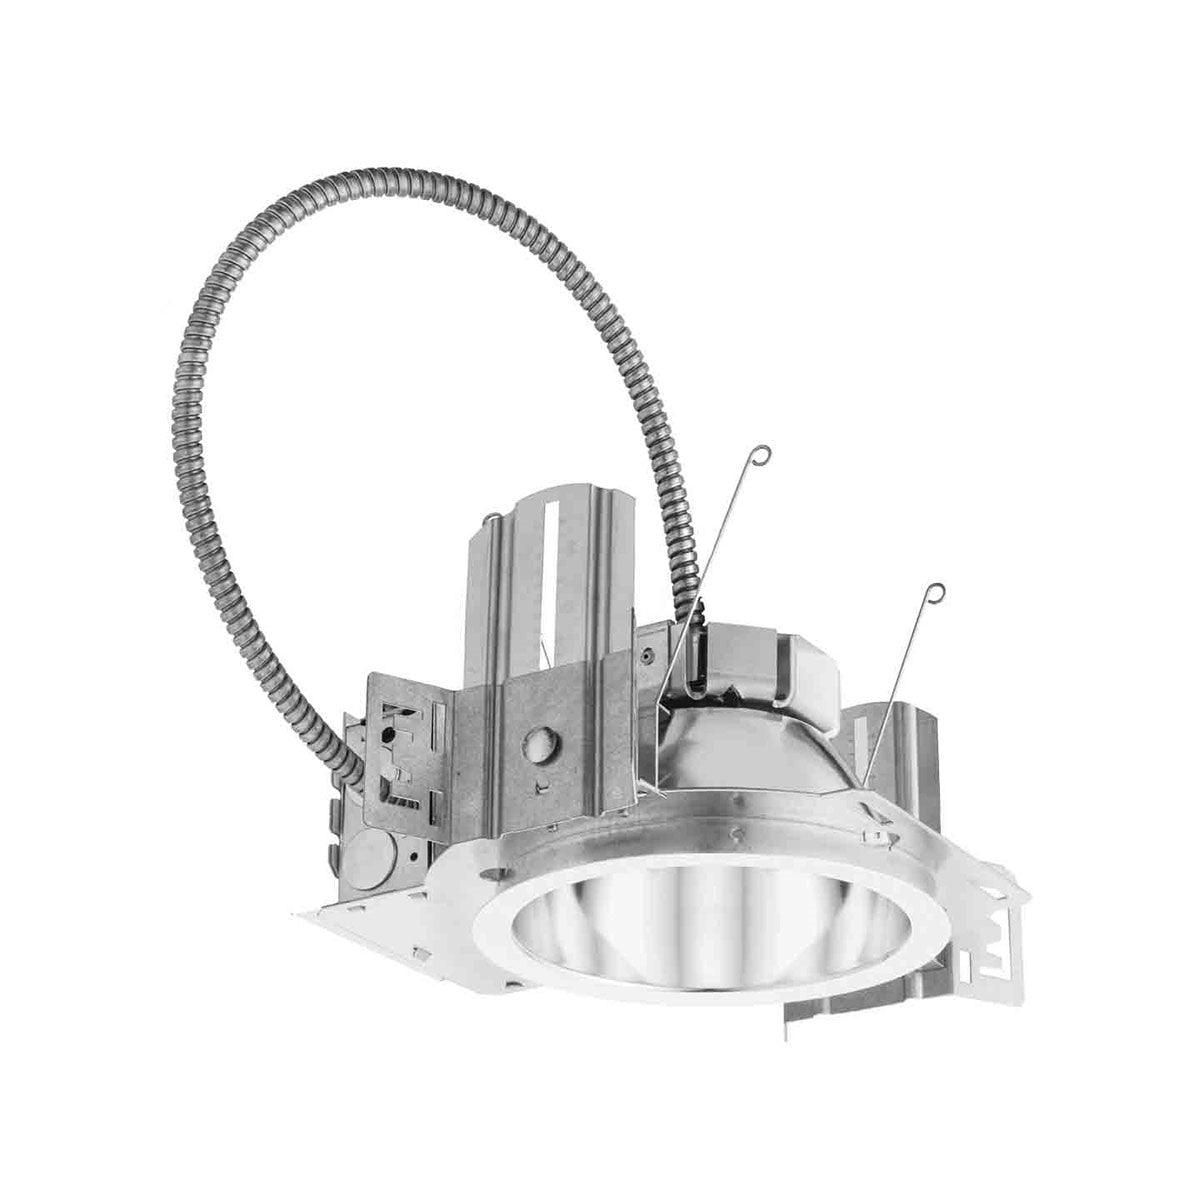 Lithonia LDN6 Commercial LED Recessed Downlight, 1500 lumens, 3500K (Reflector Sold Separately)